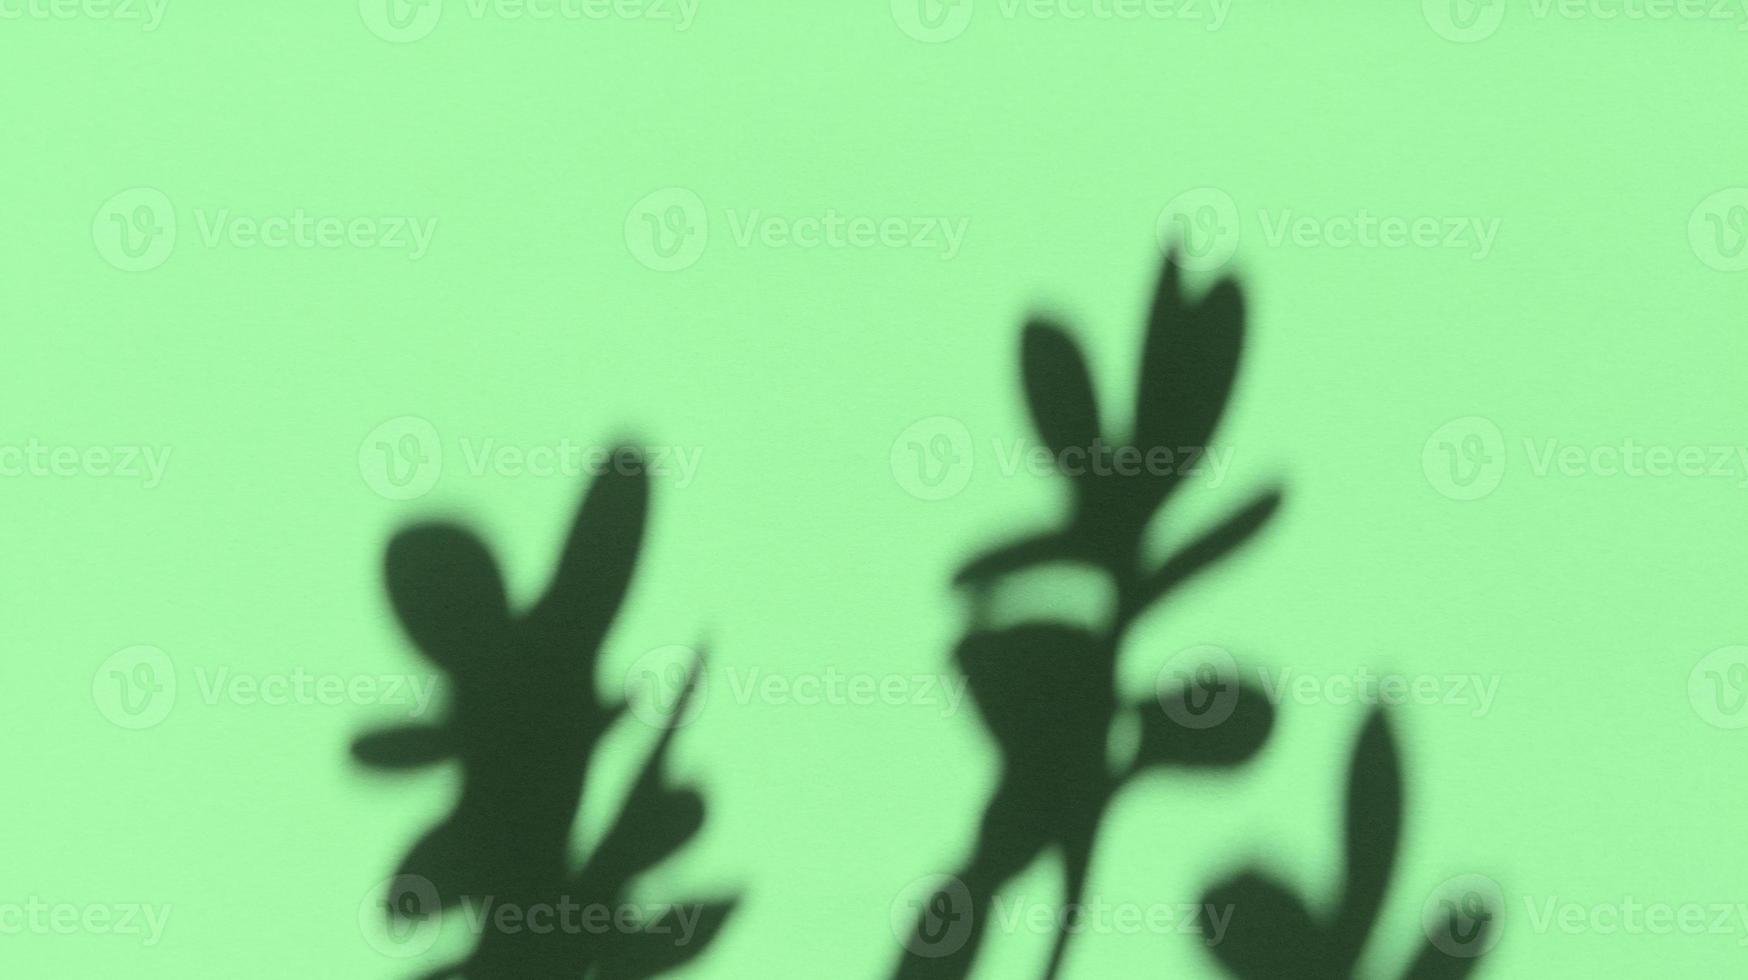 Leaves shadows on green pastel texture paper. Abstract backgorund. Stock photo. photo